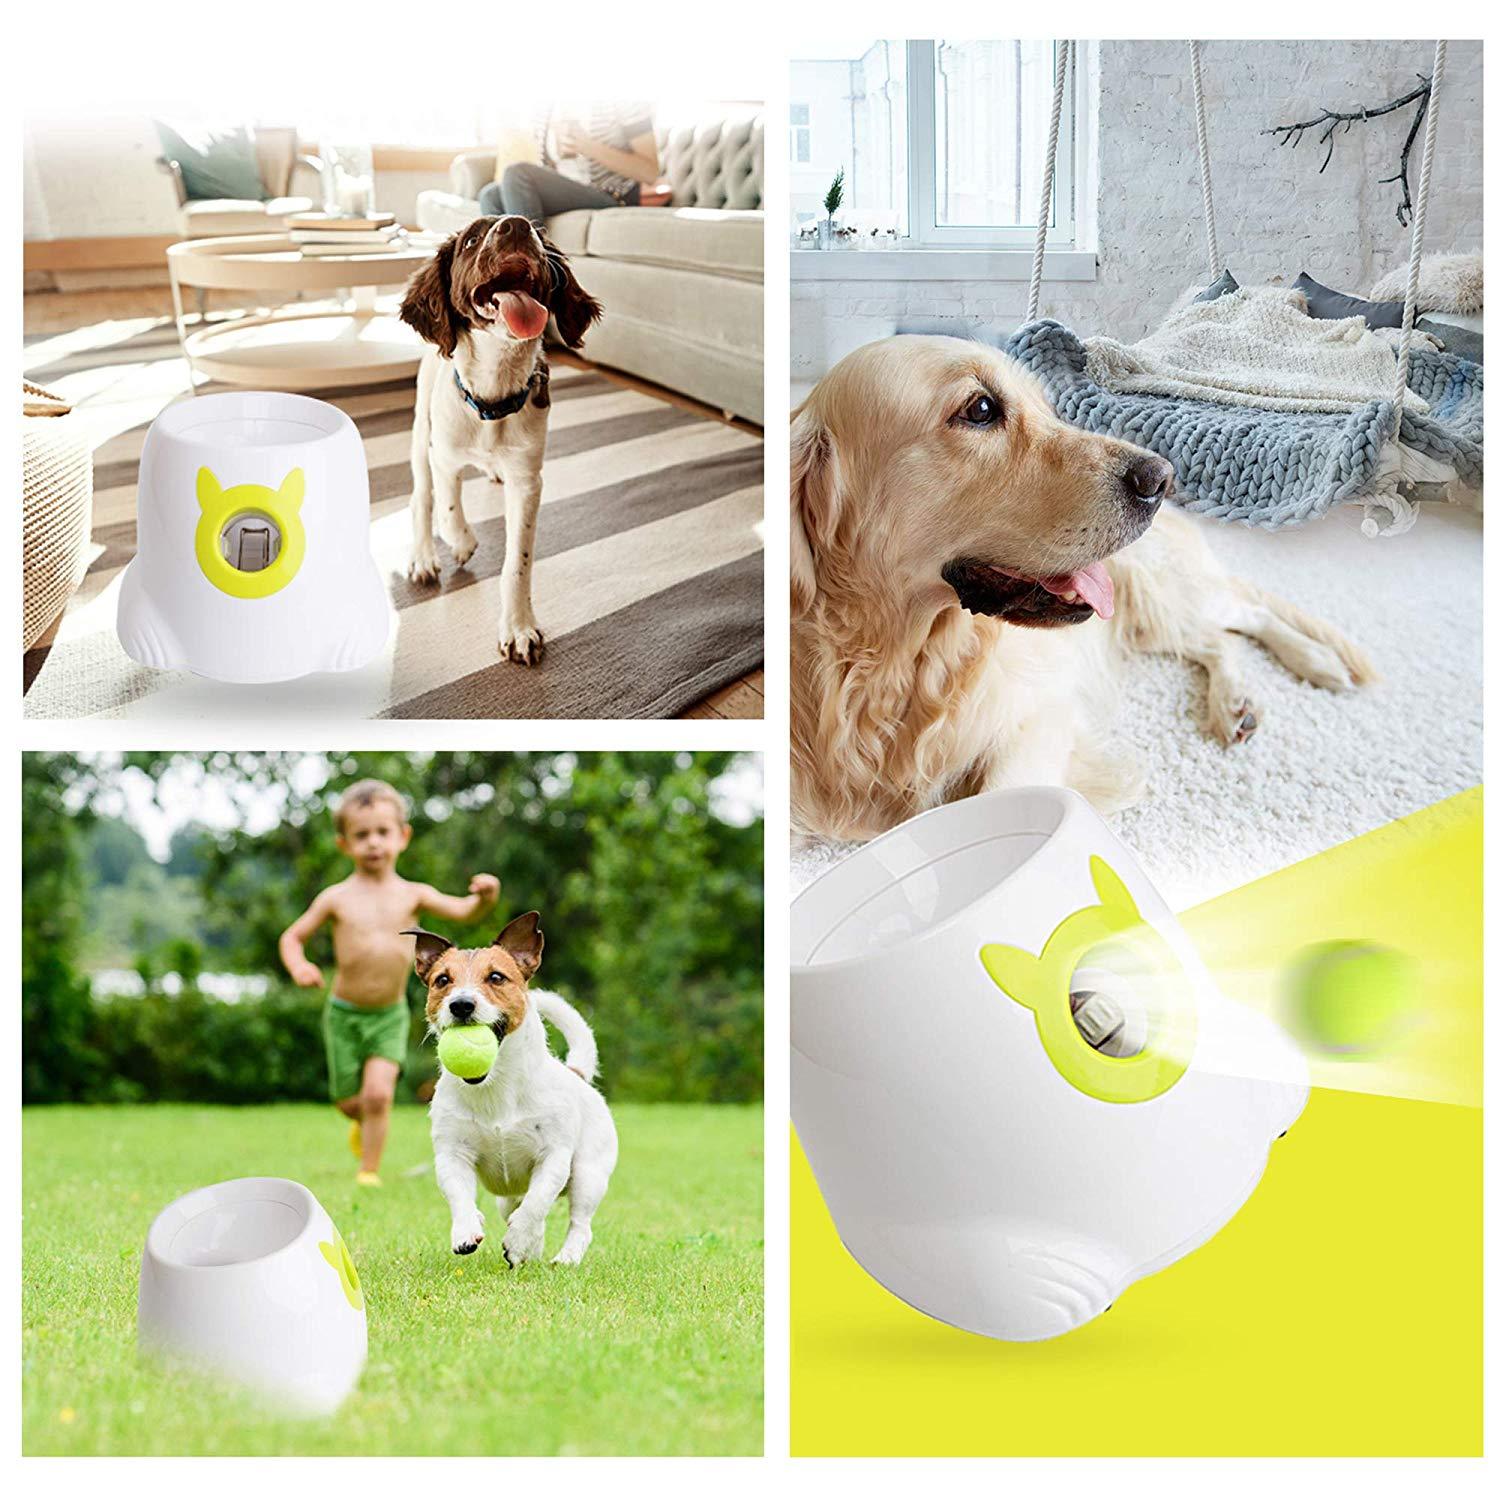 Bosonshop nteractive Ball Launcher for Dogs with Tennis Balls with remote control